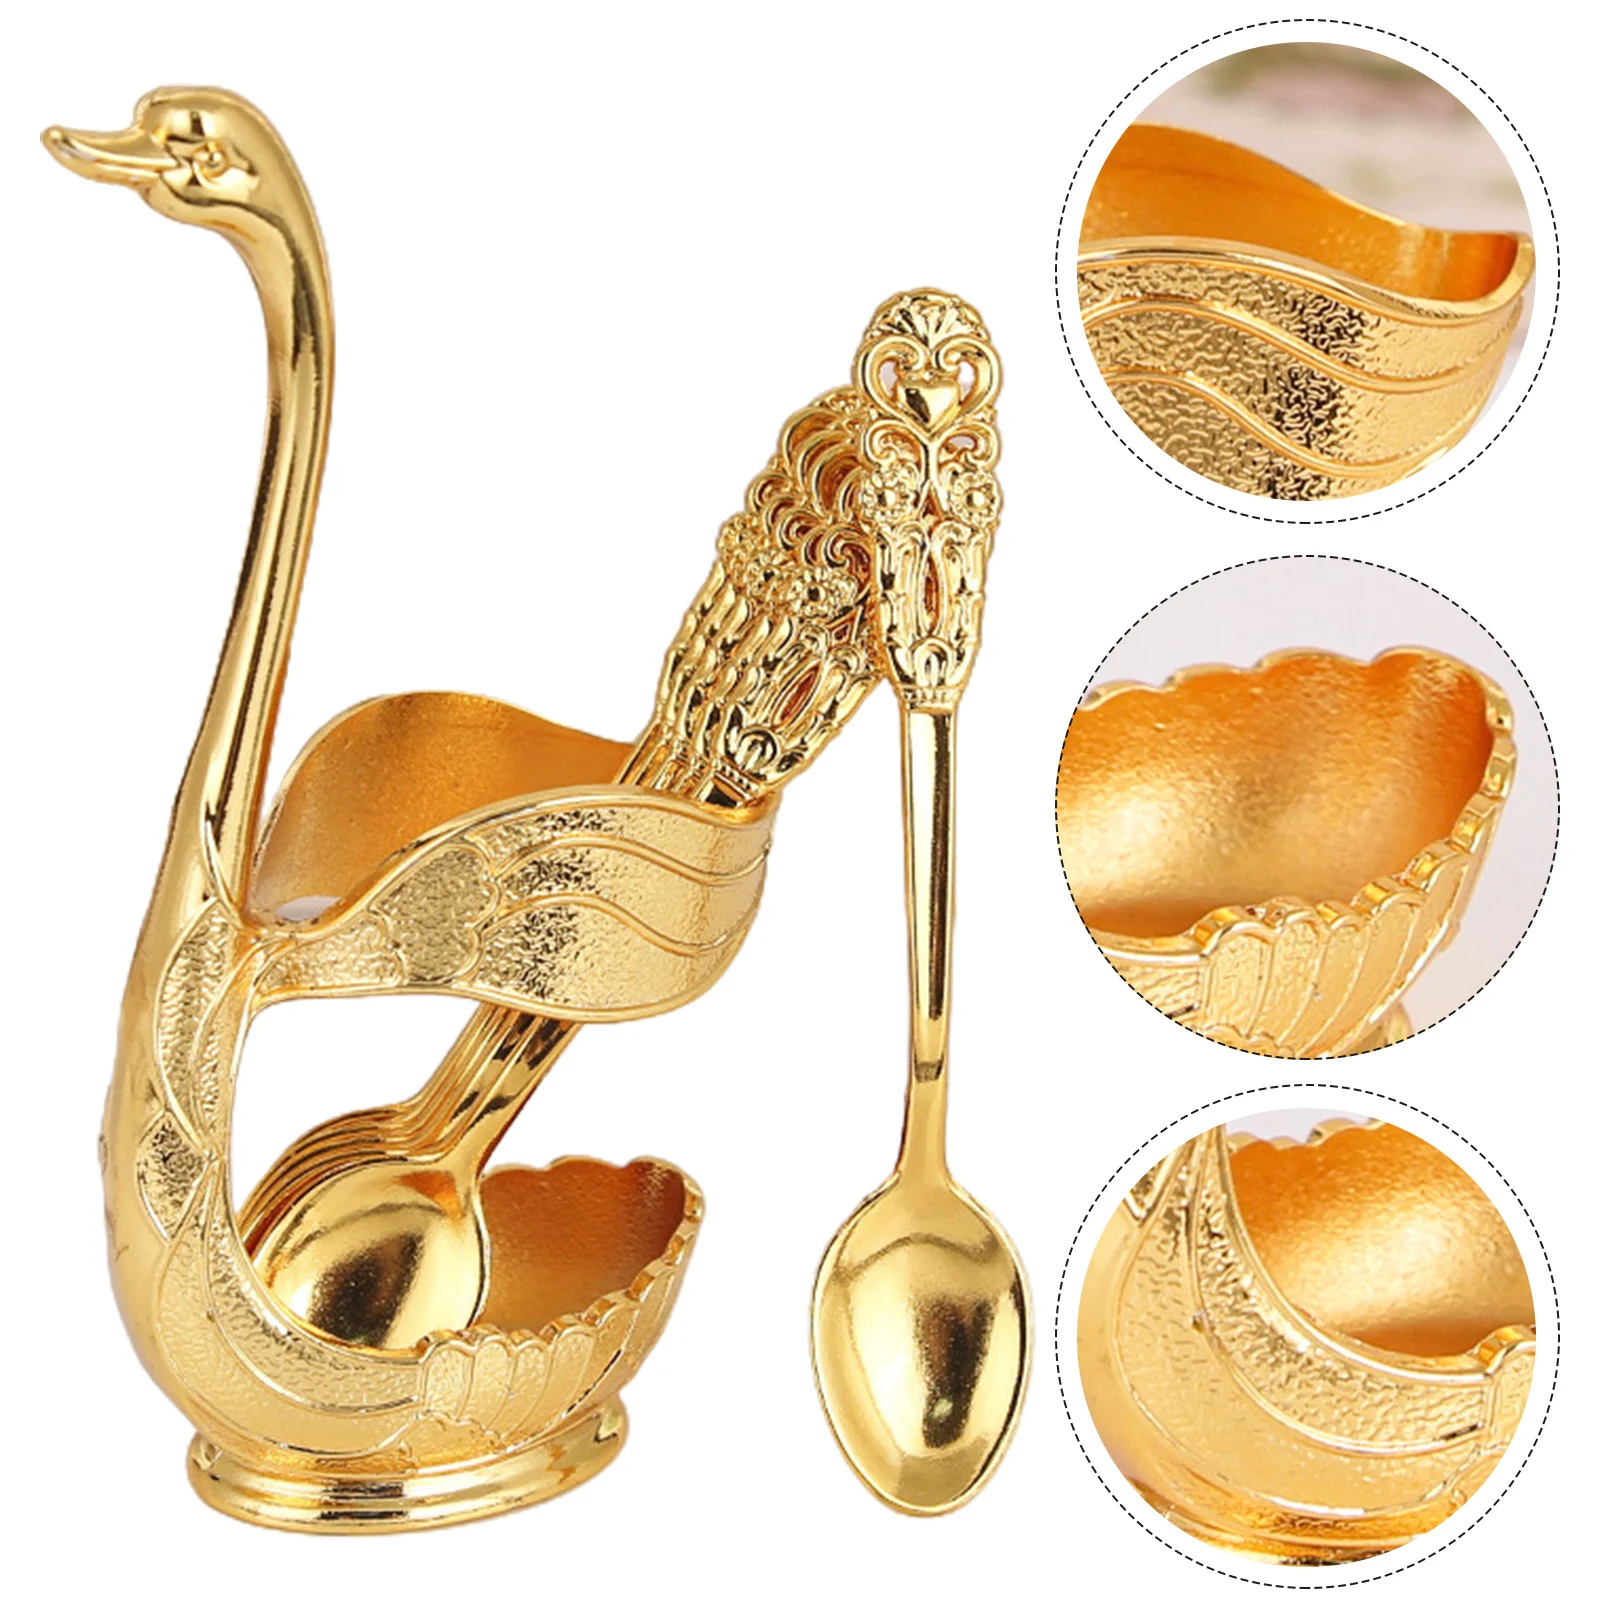 

Gold Creative Dinnerware Set Decorative Swan Base Holder With 6 Spoons Forks For Coffee Fruit Dessert Stirring Mixing Teaspoon